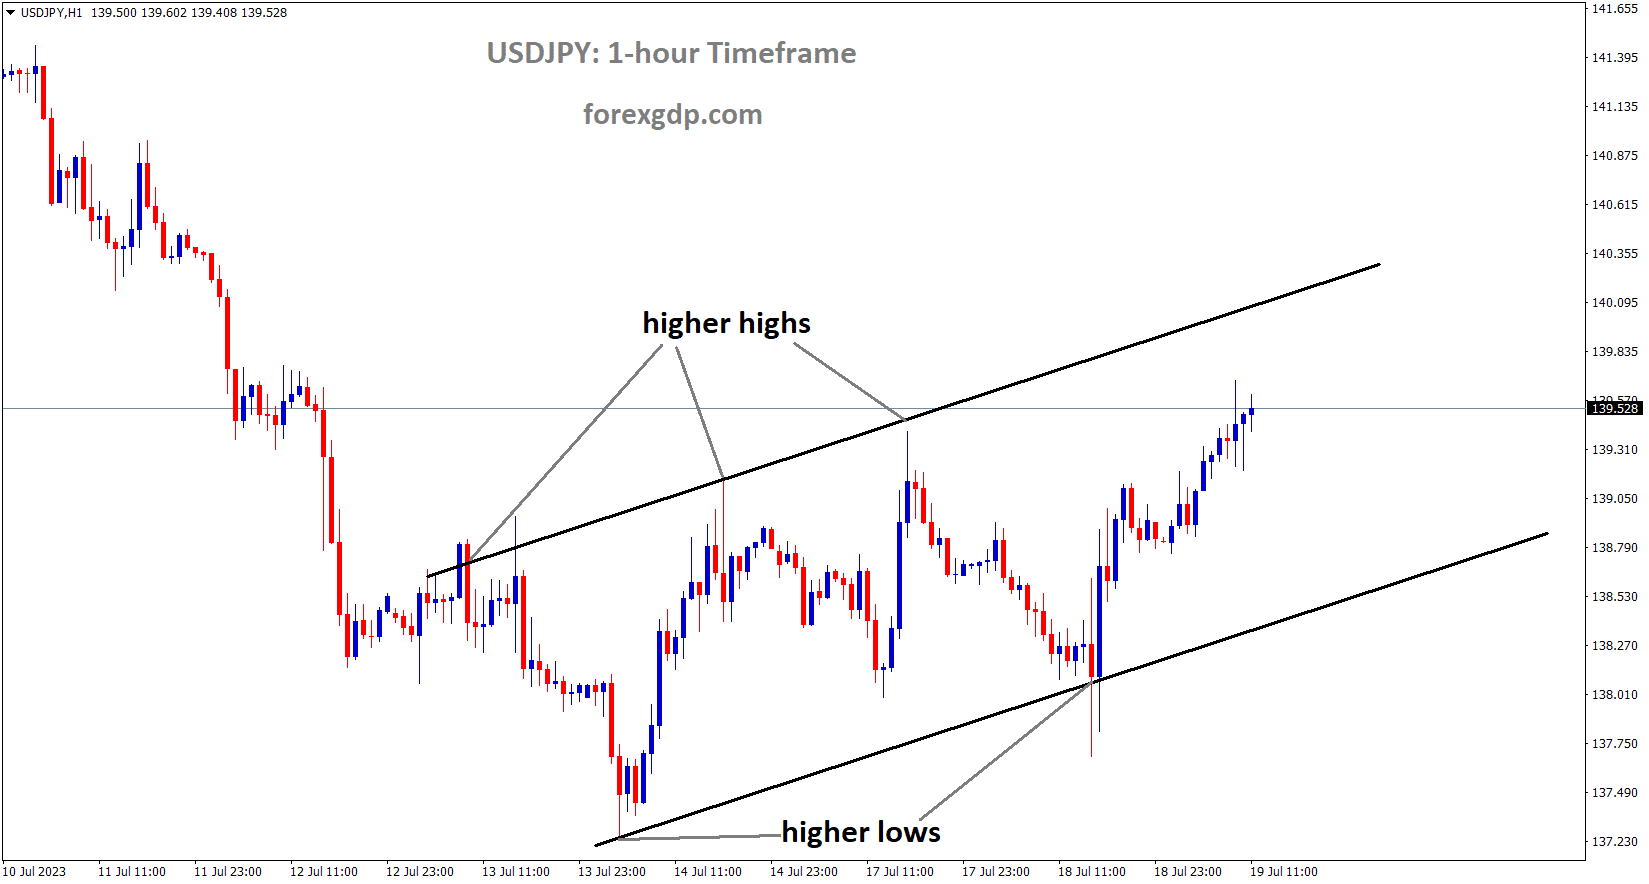 USDJPY is moving in an Ascending channel and the market has rebounded from the higher low area of the channel 1